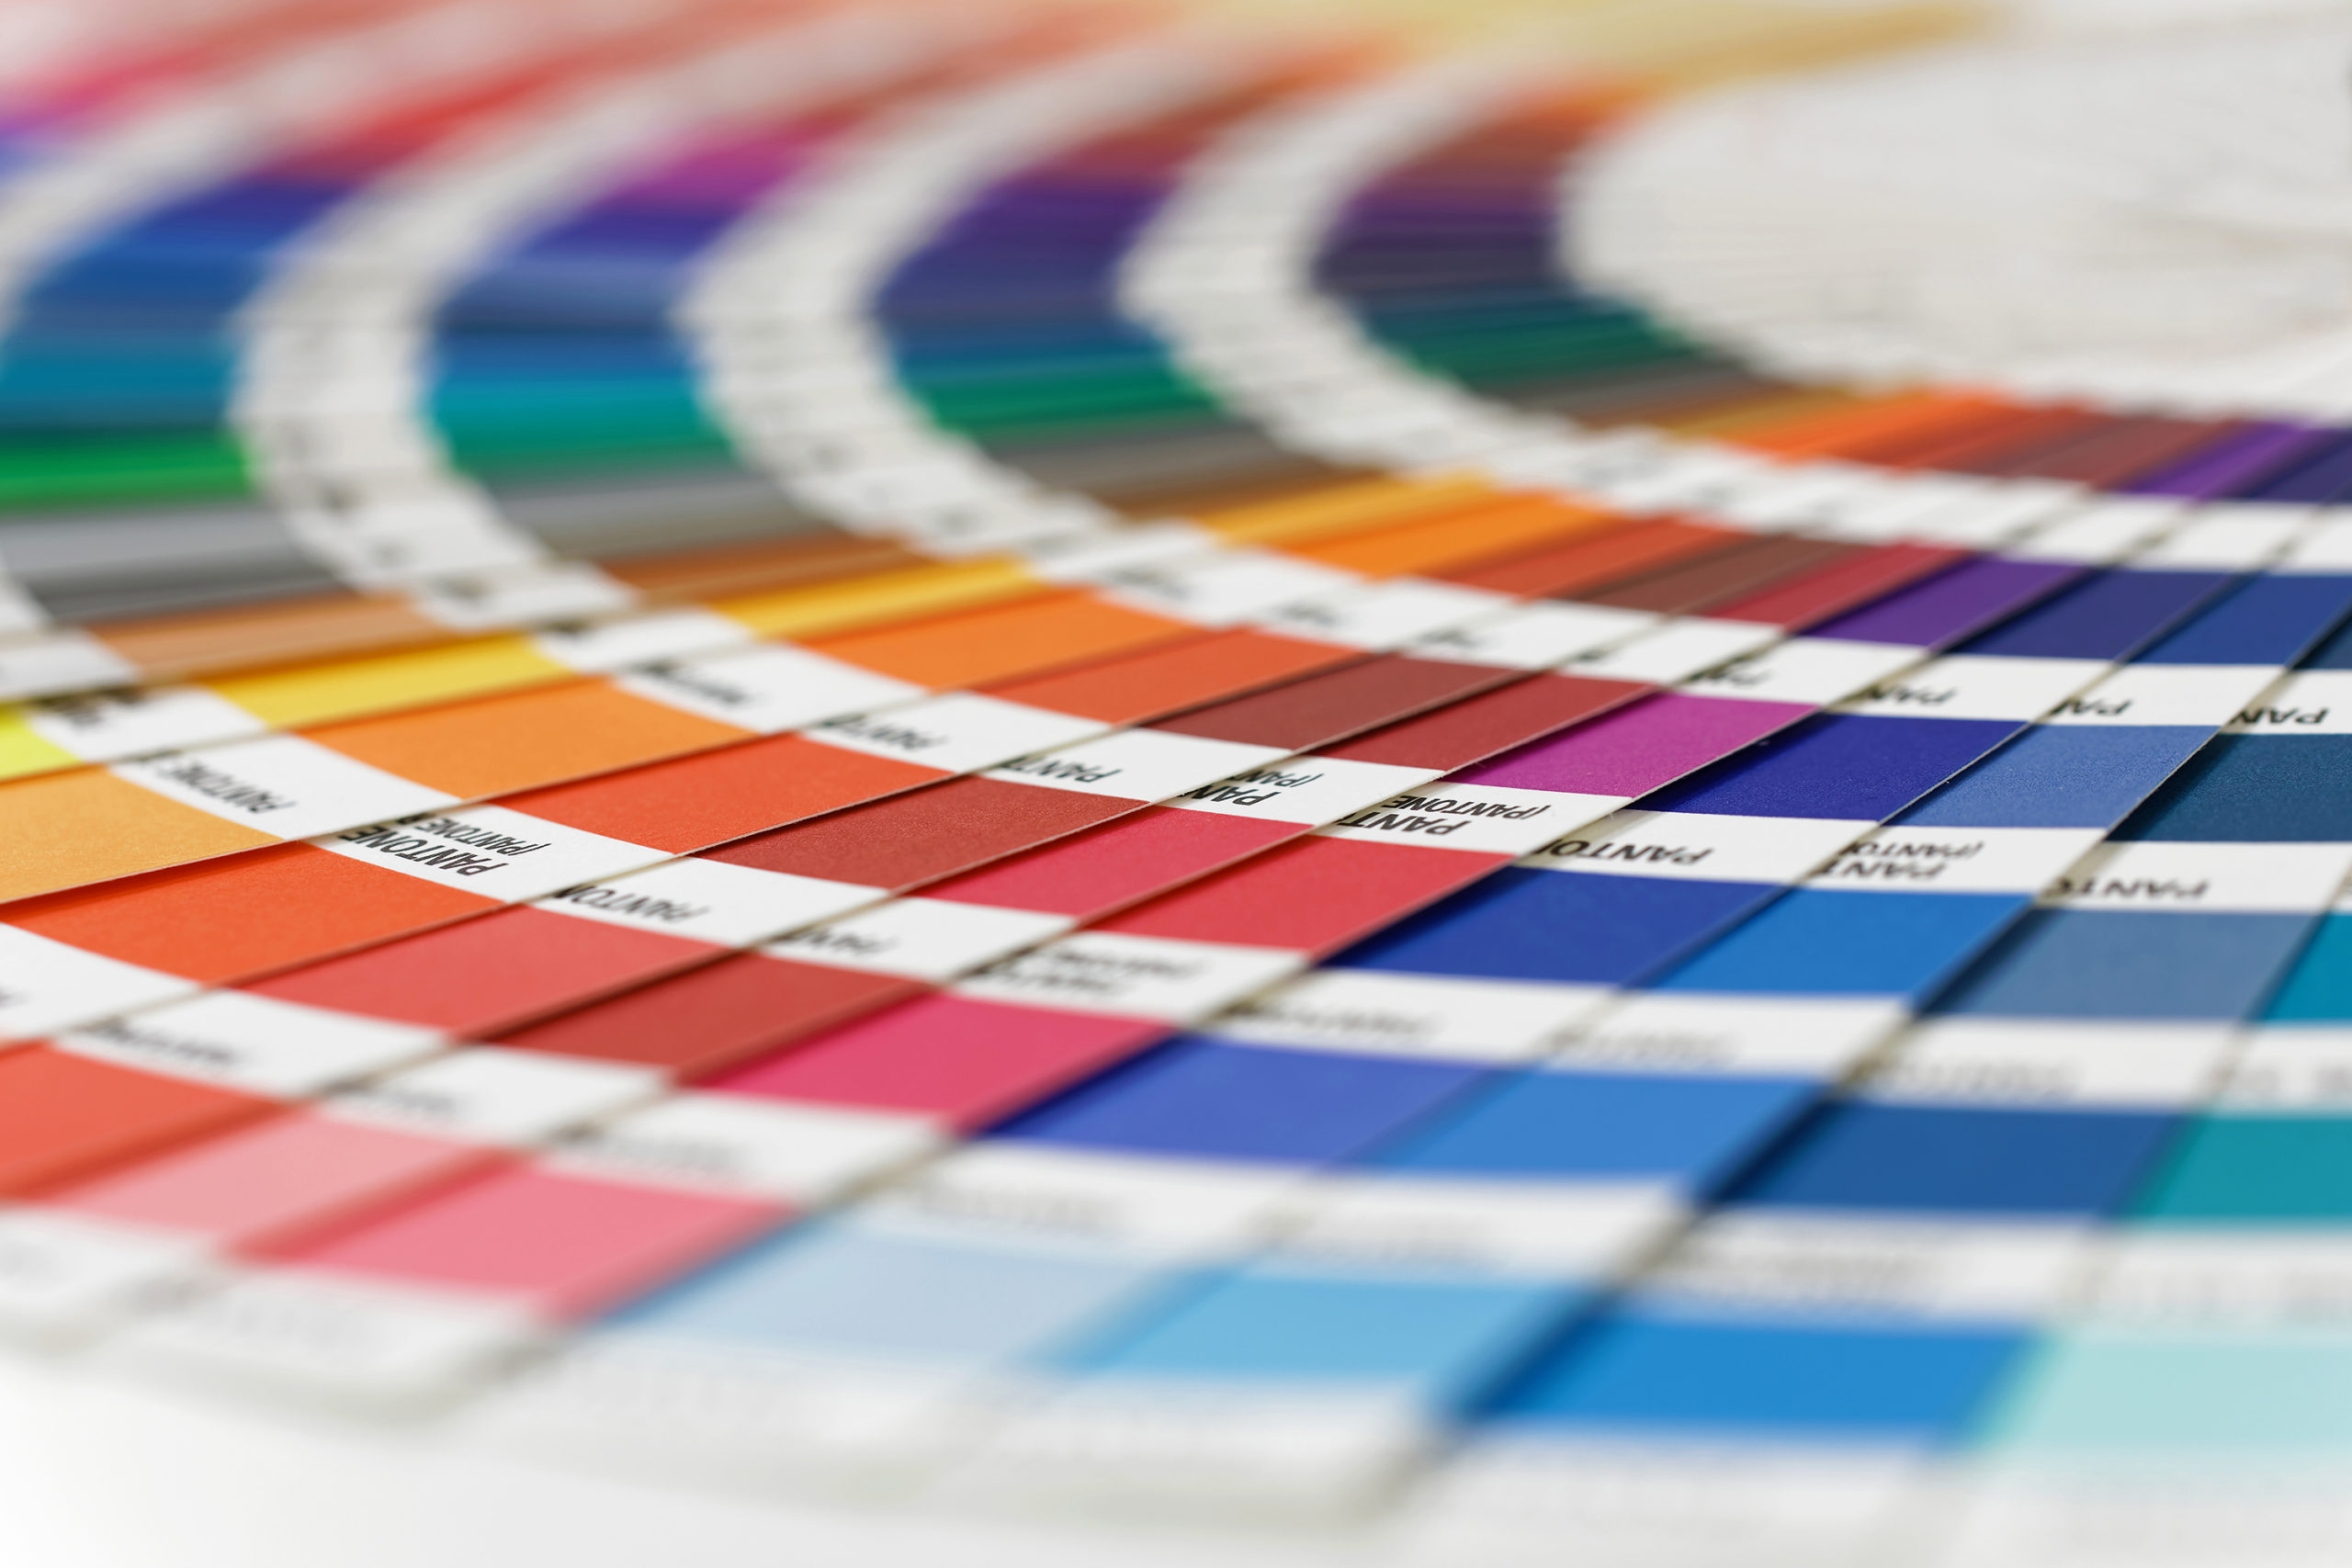 RGB Color Swatches Chart: Sublimation Printing to Test Color Print Output